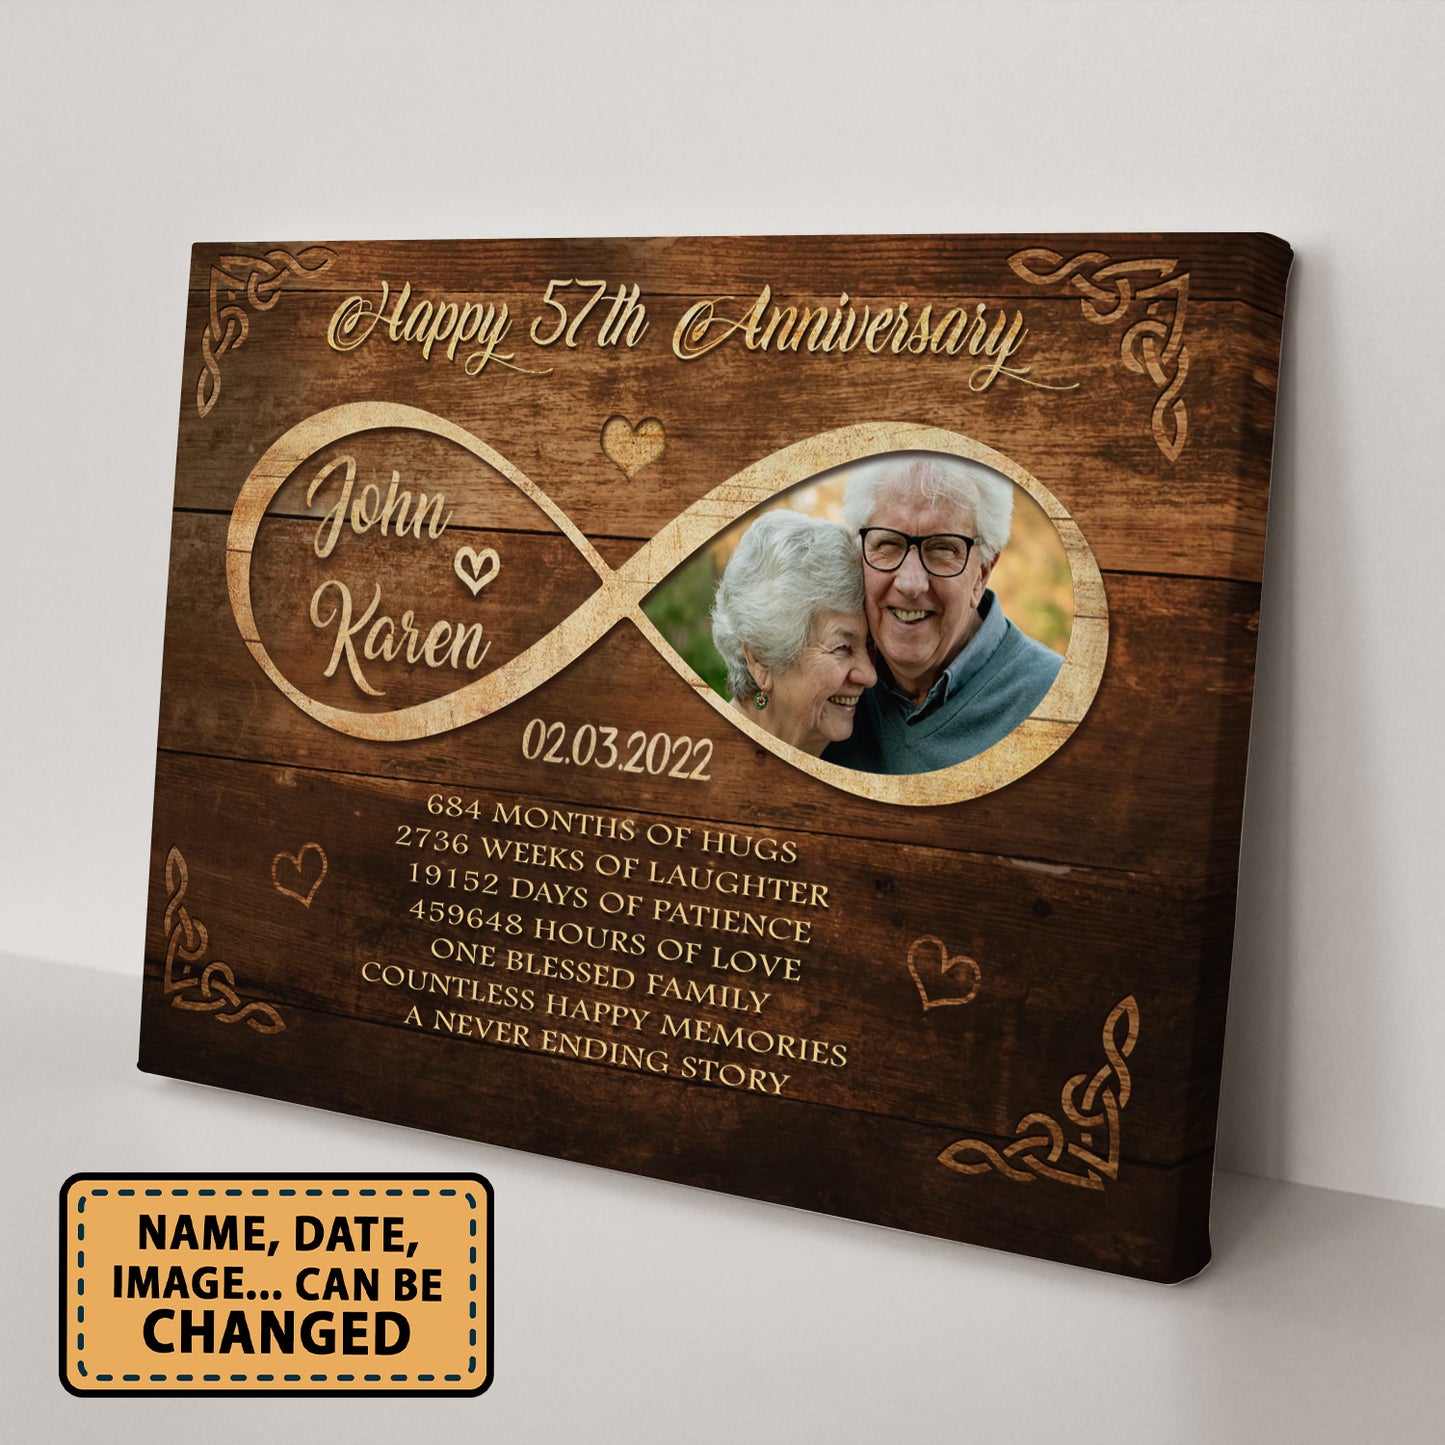 Happy 57th Anniversary Old Television Anniversary Canvas Valentine Gifts